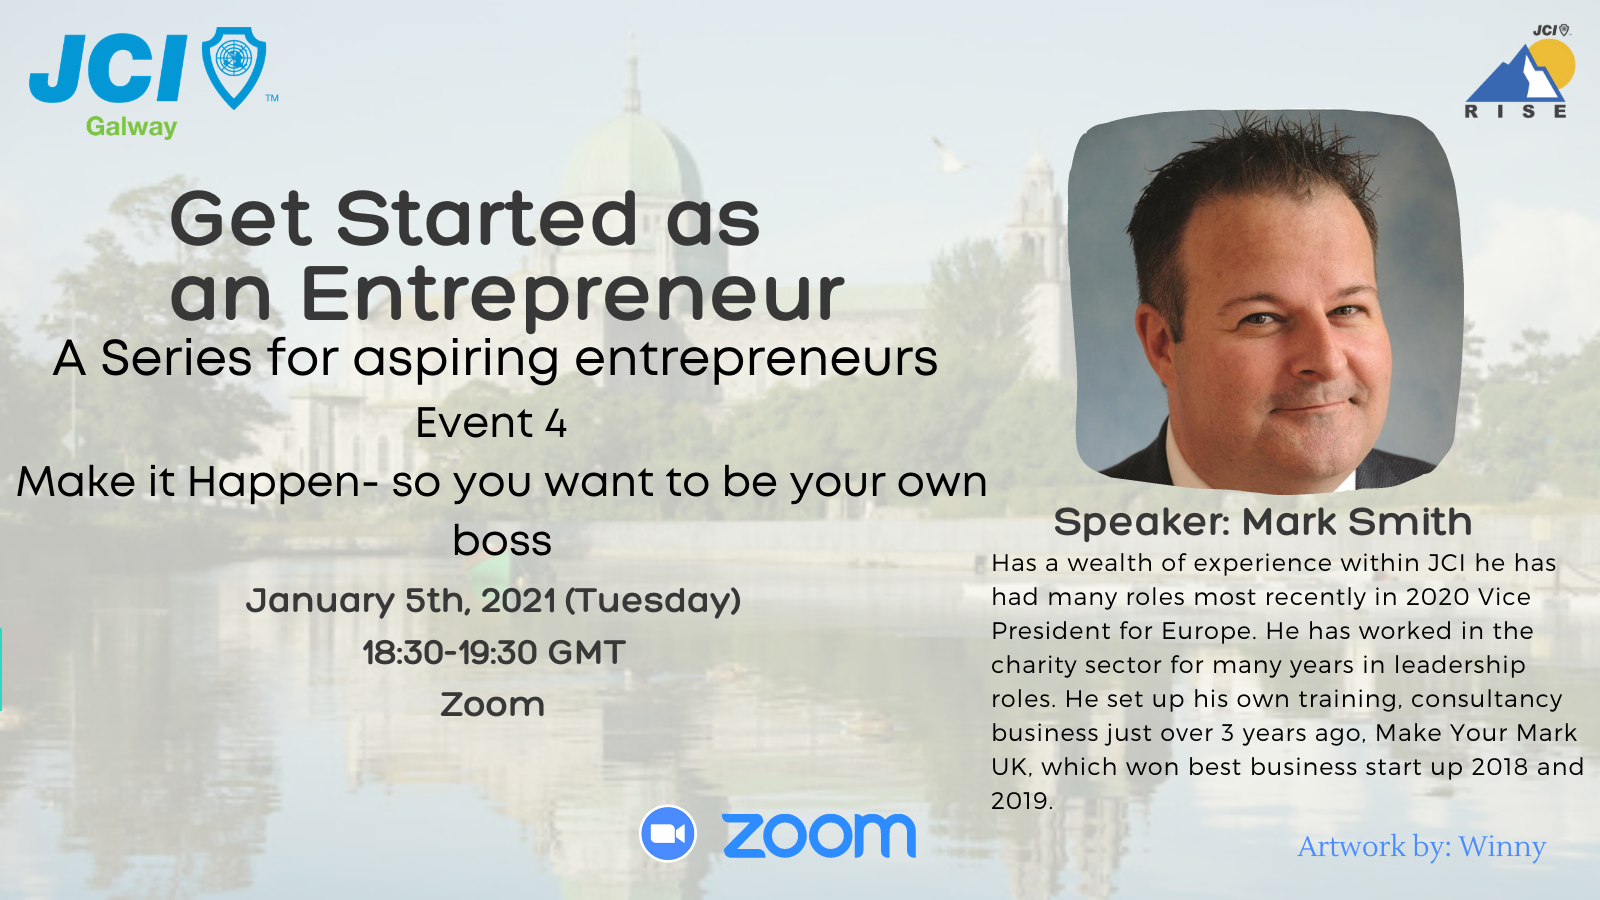 Get Started as an Entrepreneur Series - 4: Make it Happen, you want to be your own boss